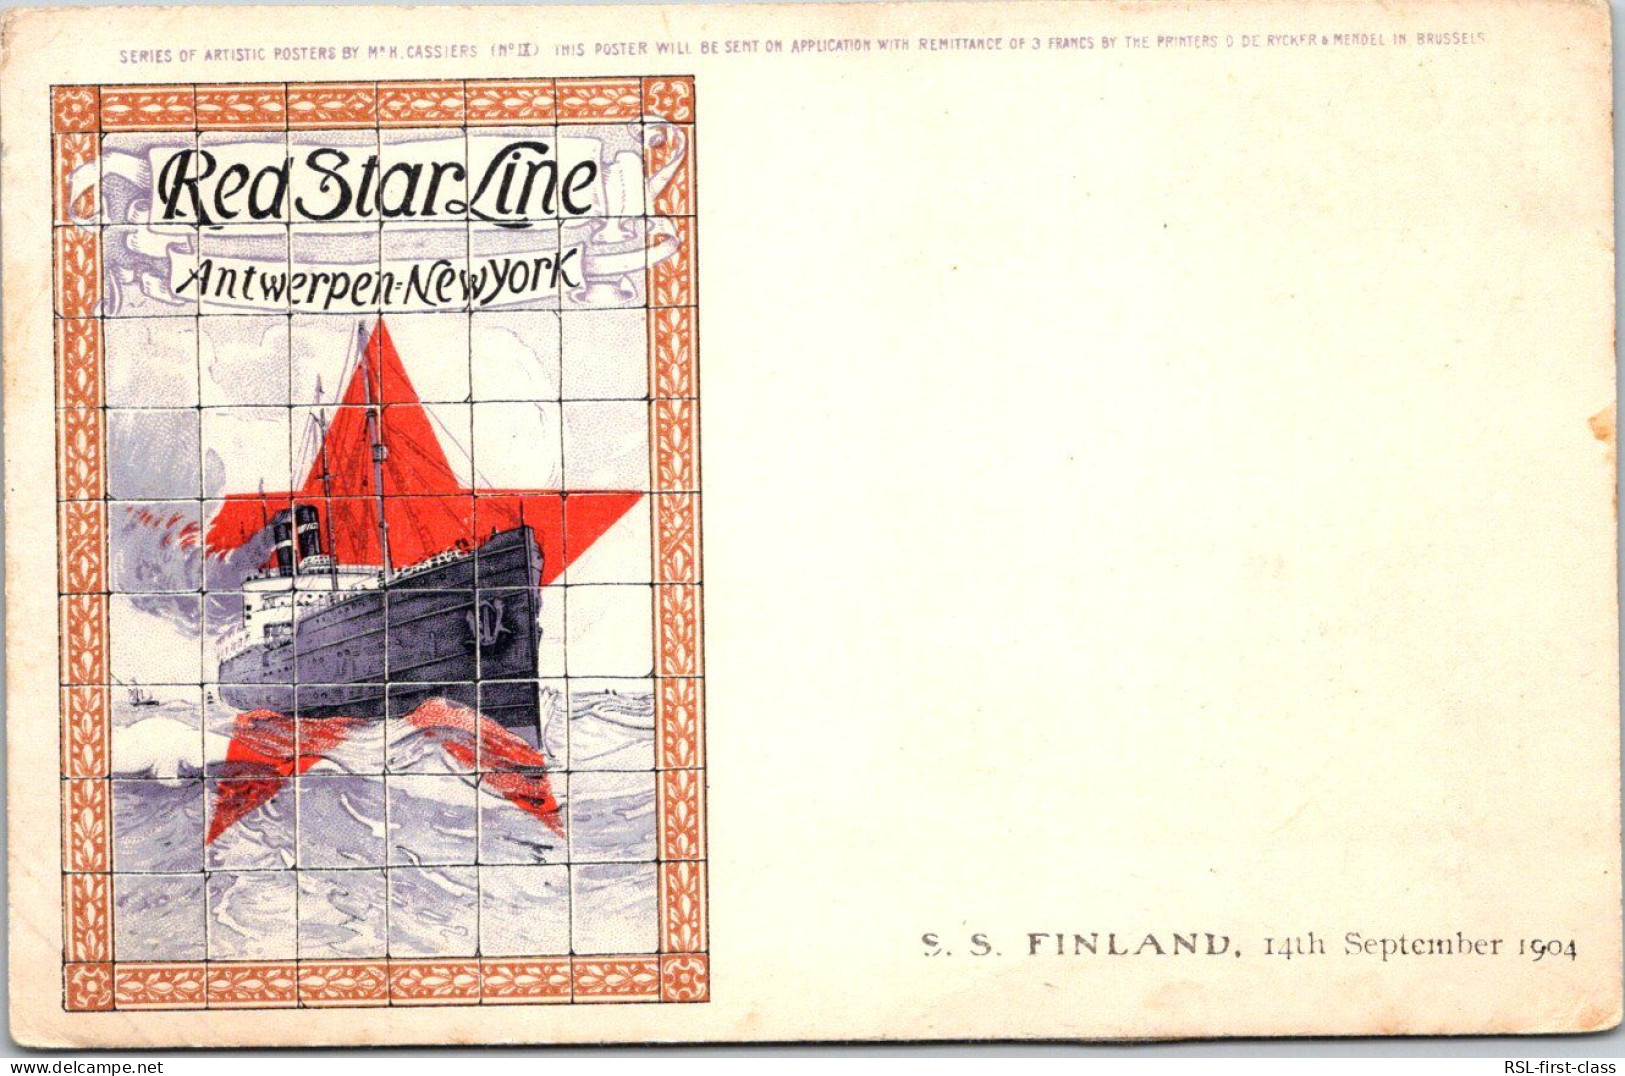 RED STAR LINE : Special Card C-6s From Serie C : Poster Designs, By H. Cassiers - Rrrarissimes - Dampfer